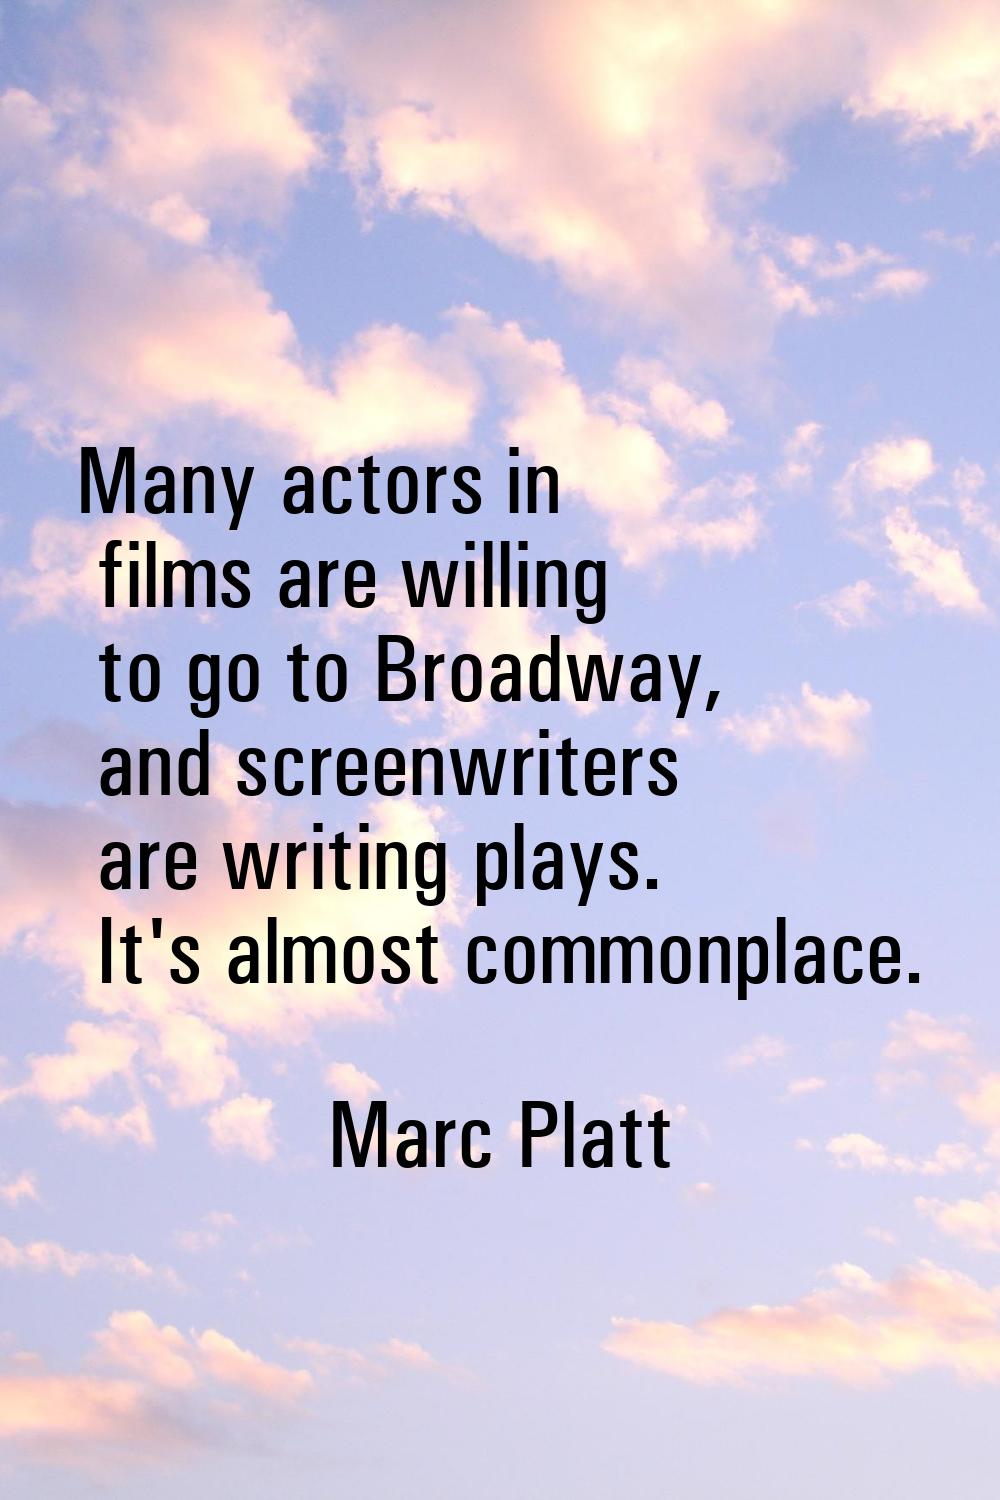 Many actors in films are willing to go to Broadway, and screenwriters are writing plays. It's almos